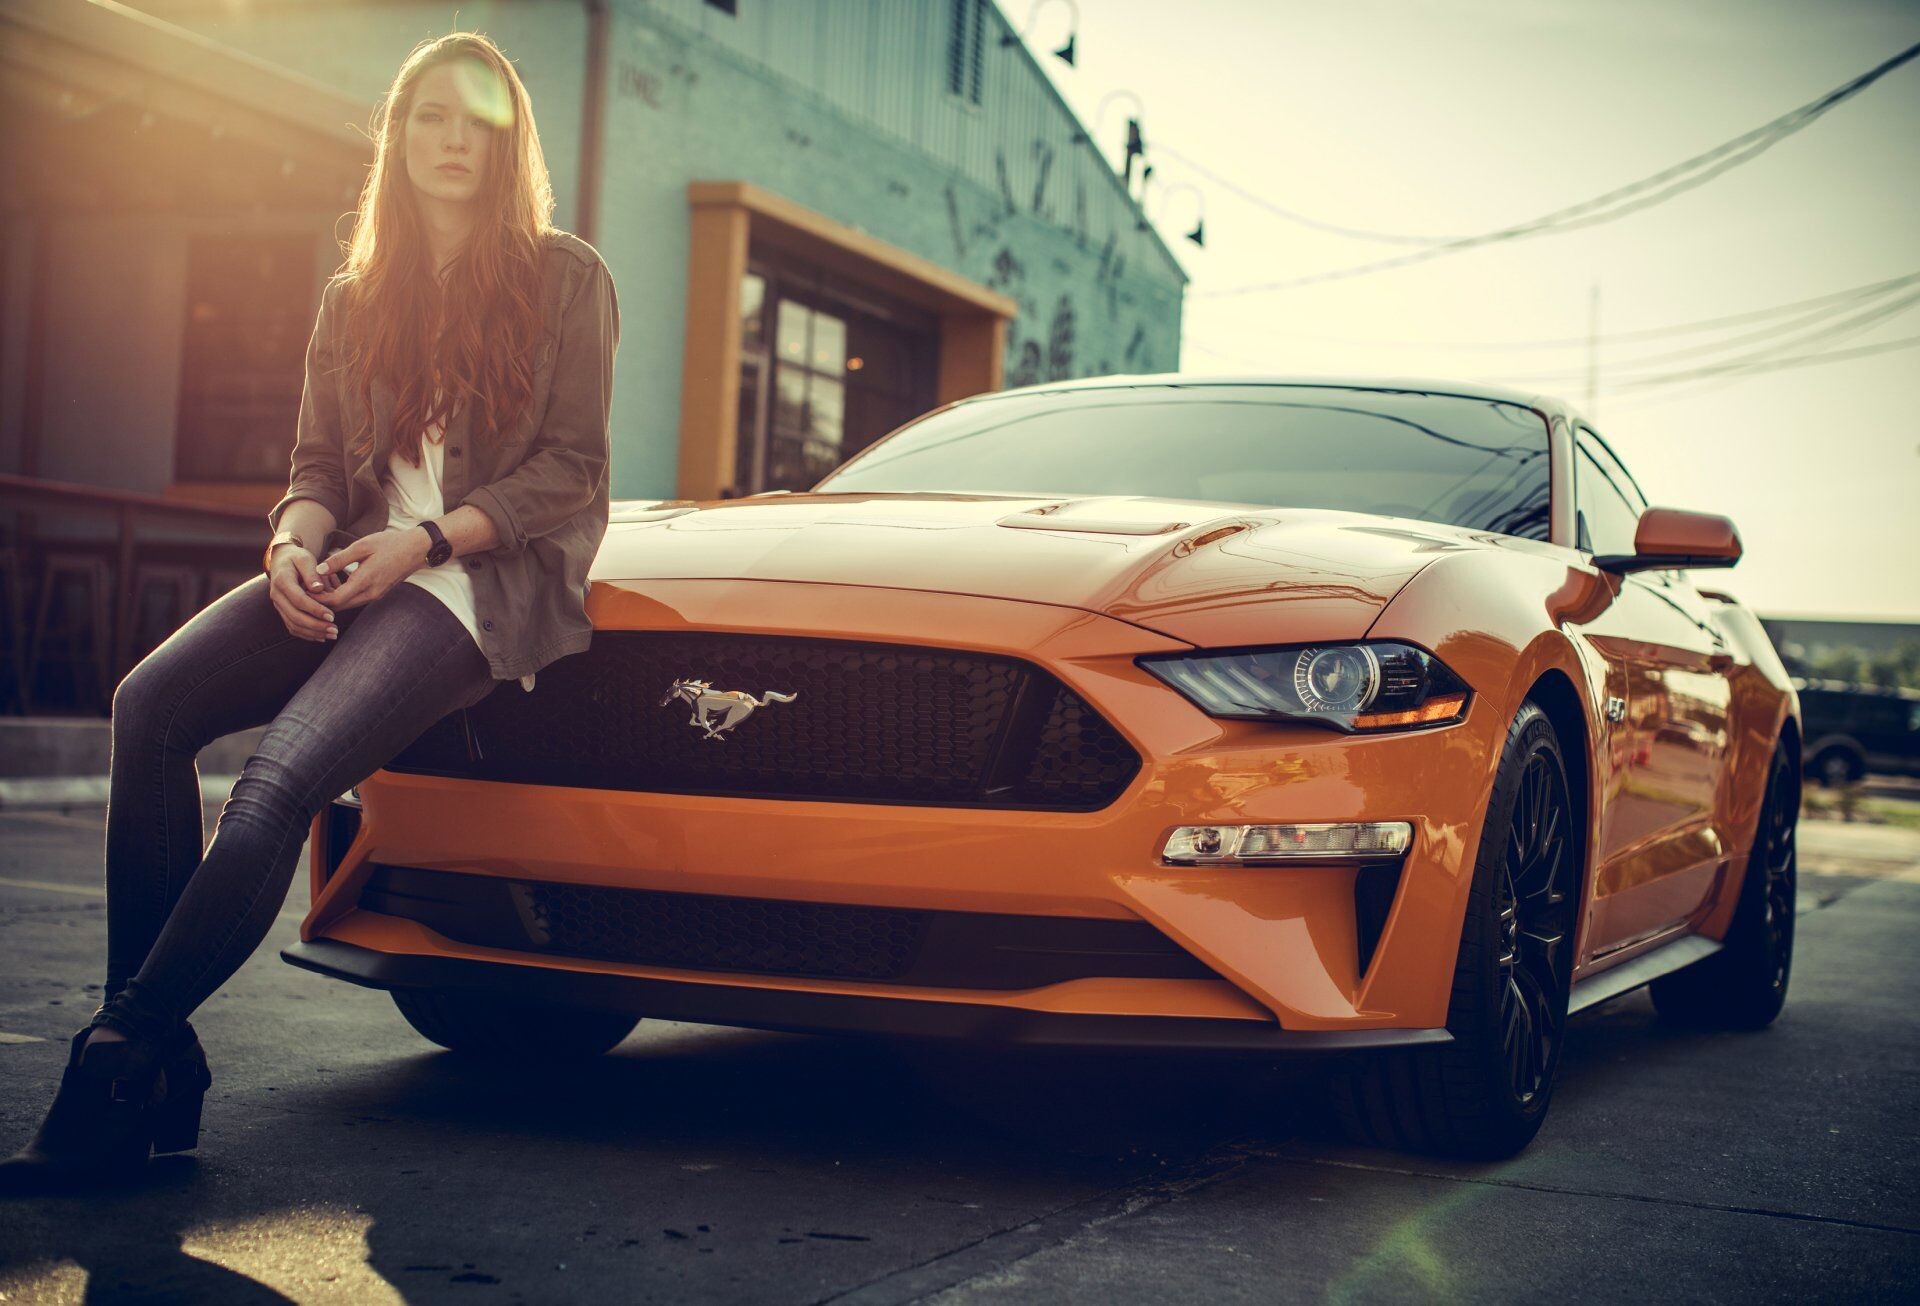 Girls and Muscle Cars: Mustang GT, A highly styled sporty coupe, Grill emblem, Running pony. 1920x1310 HD Wallpaper.